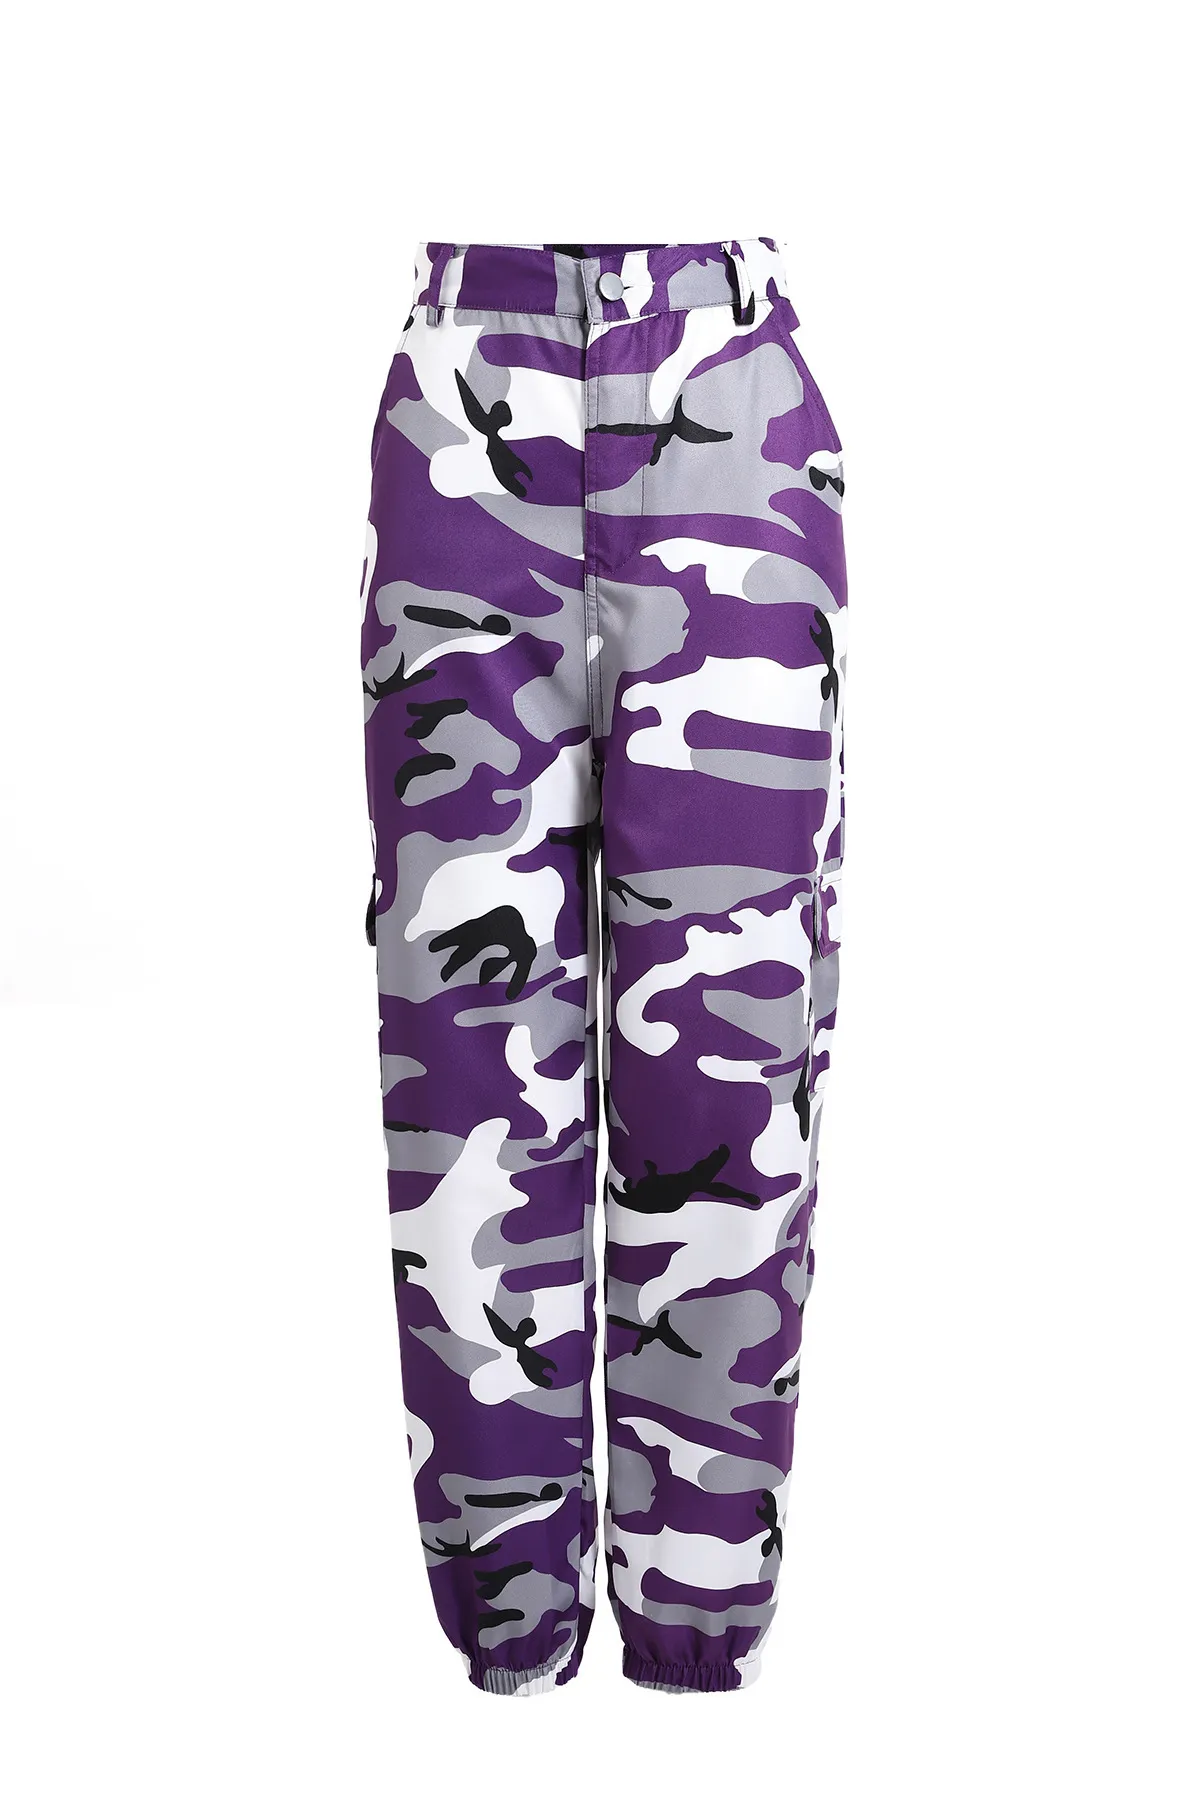 Trending Wholesale camouflage cargo pants women At Affordable